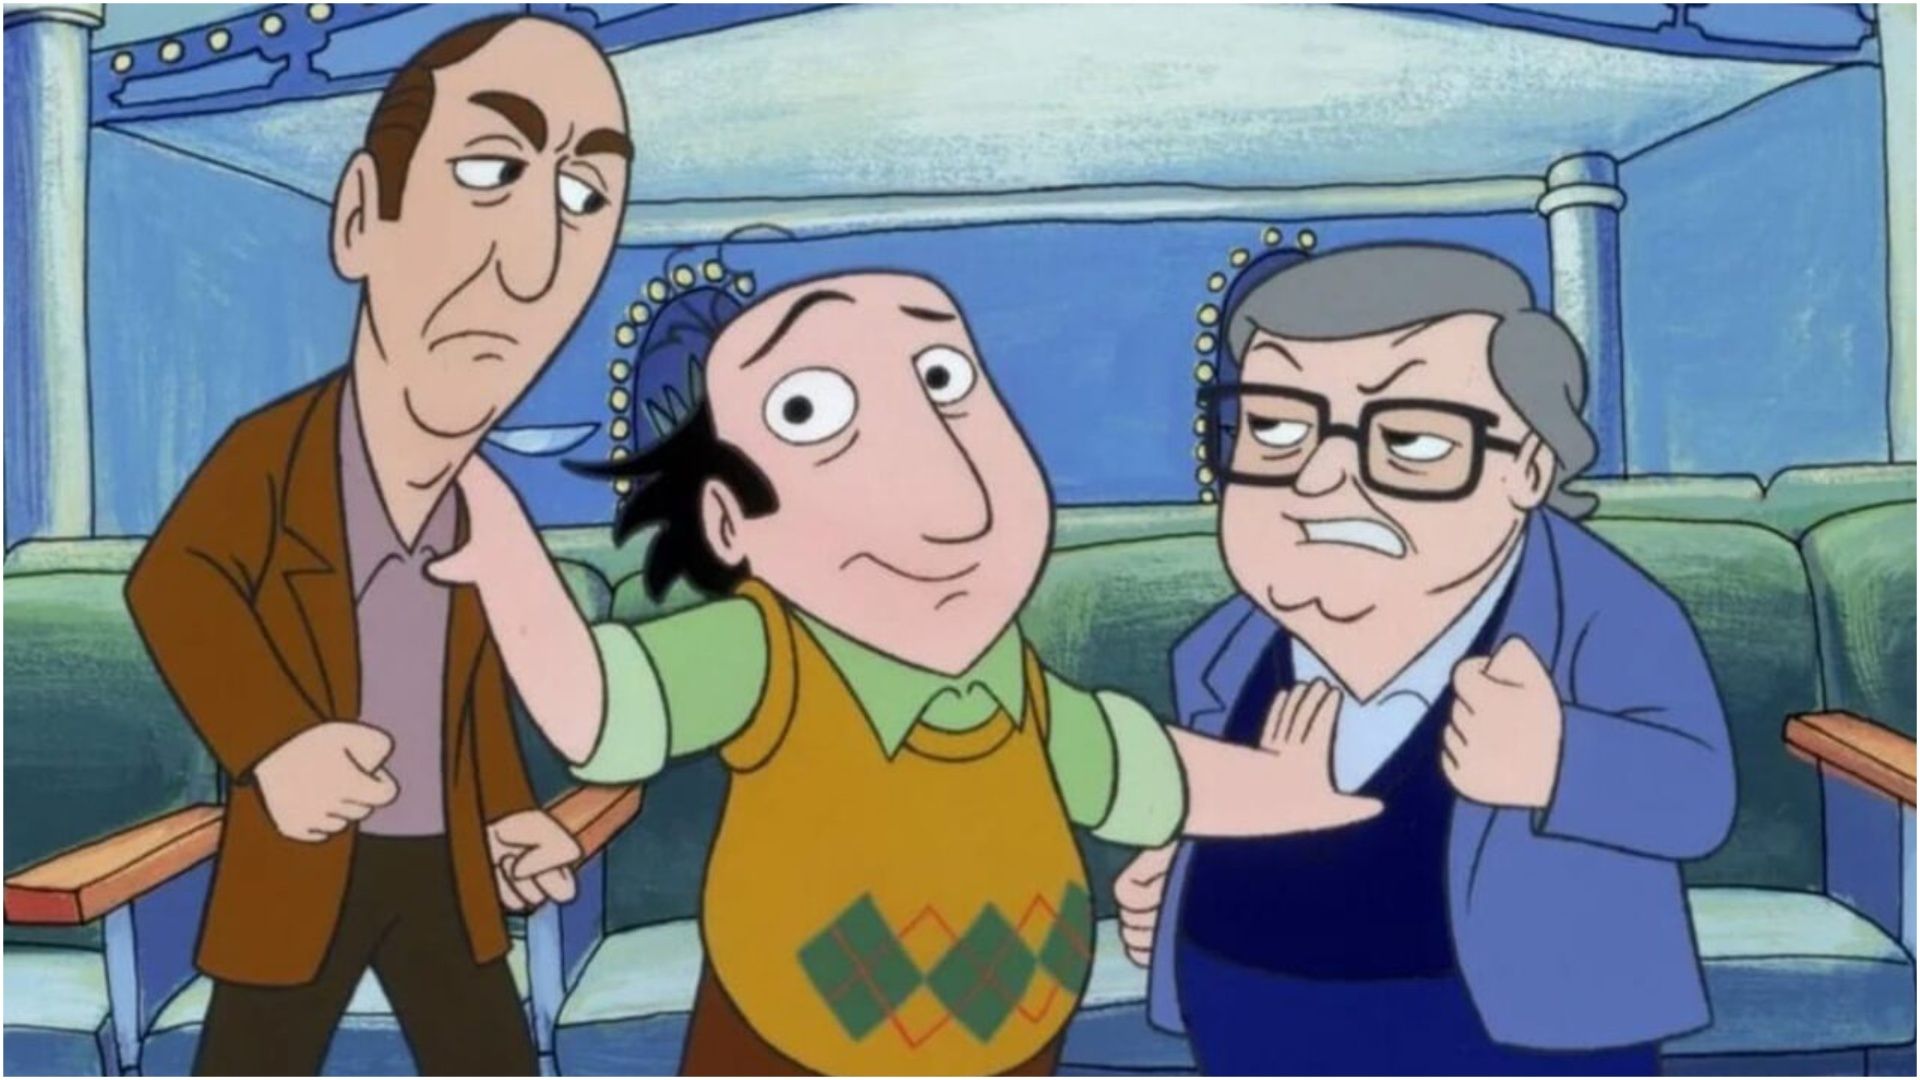 A scene from the '90s animated show, The Critic